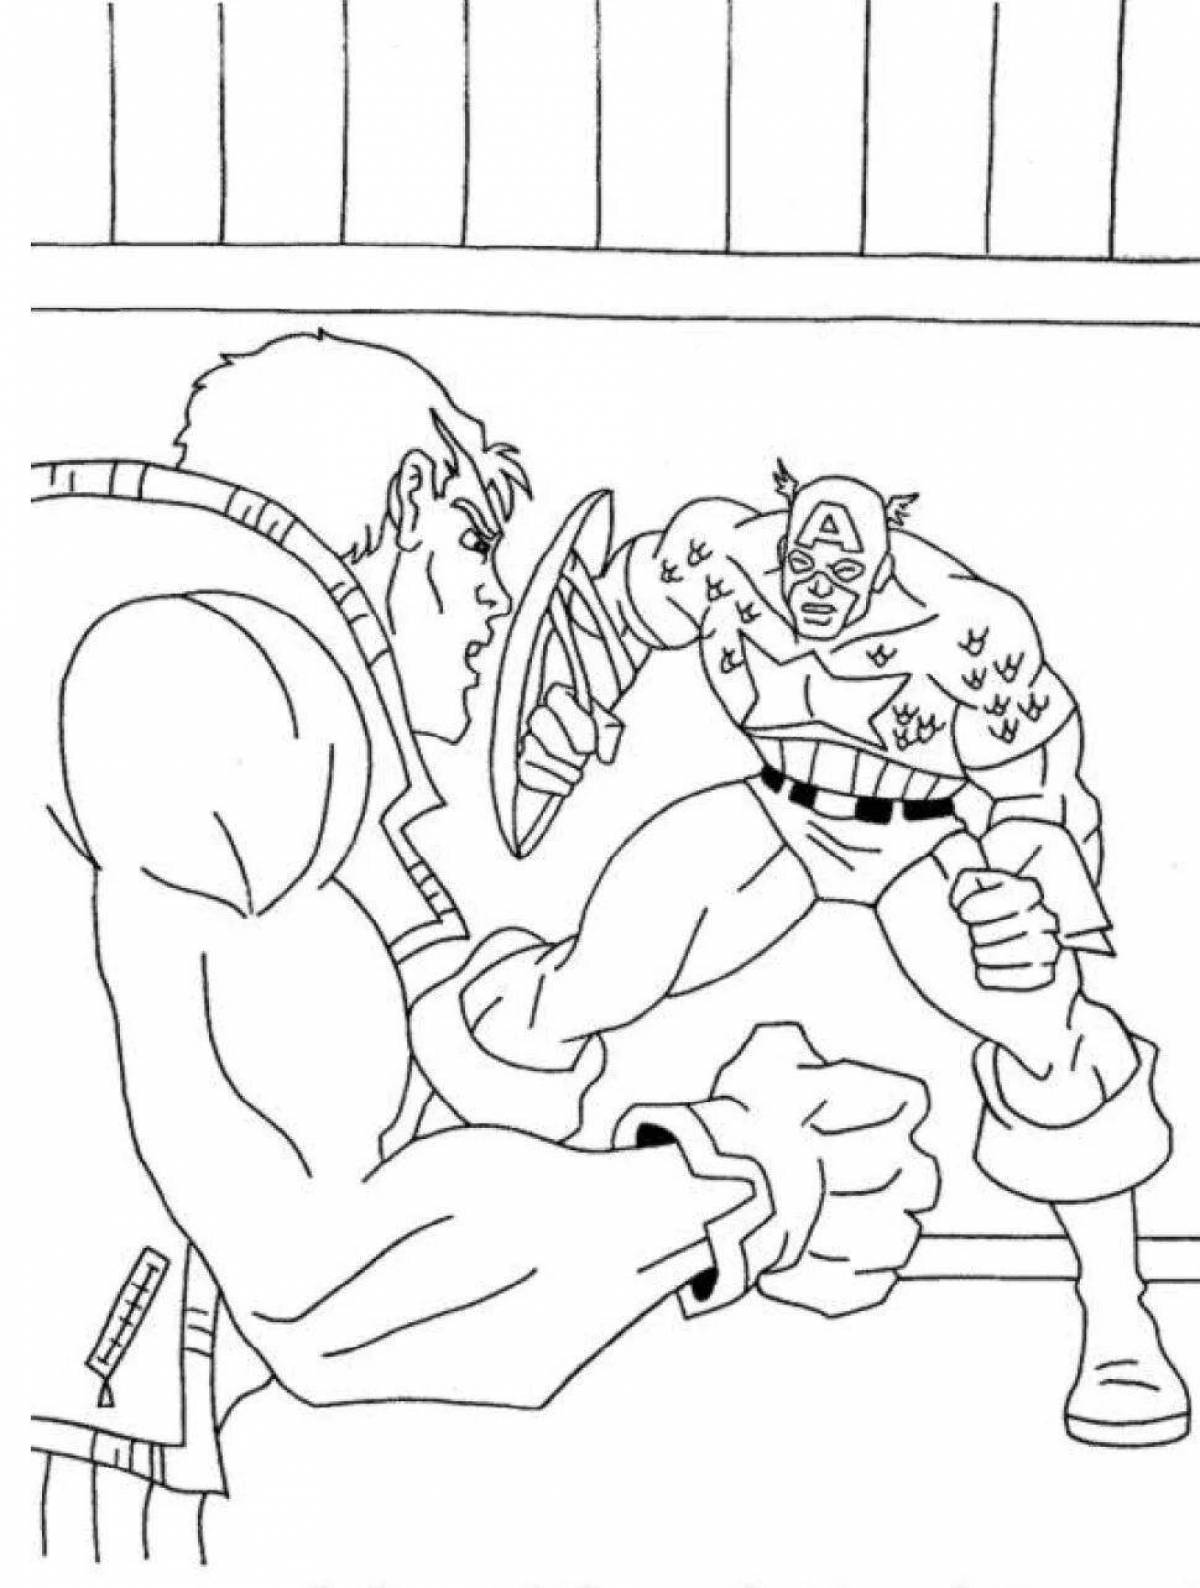 Color explosion doomsday coloring page